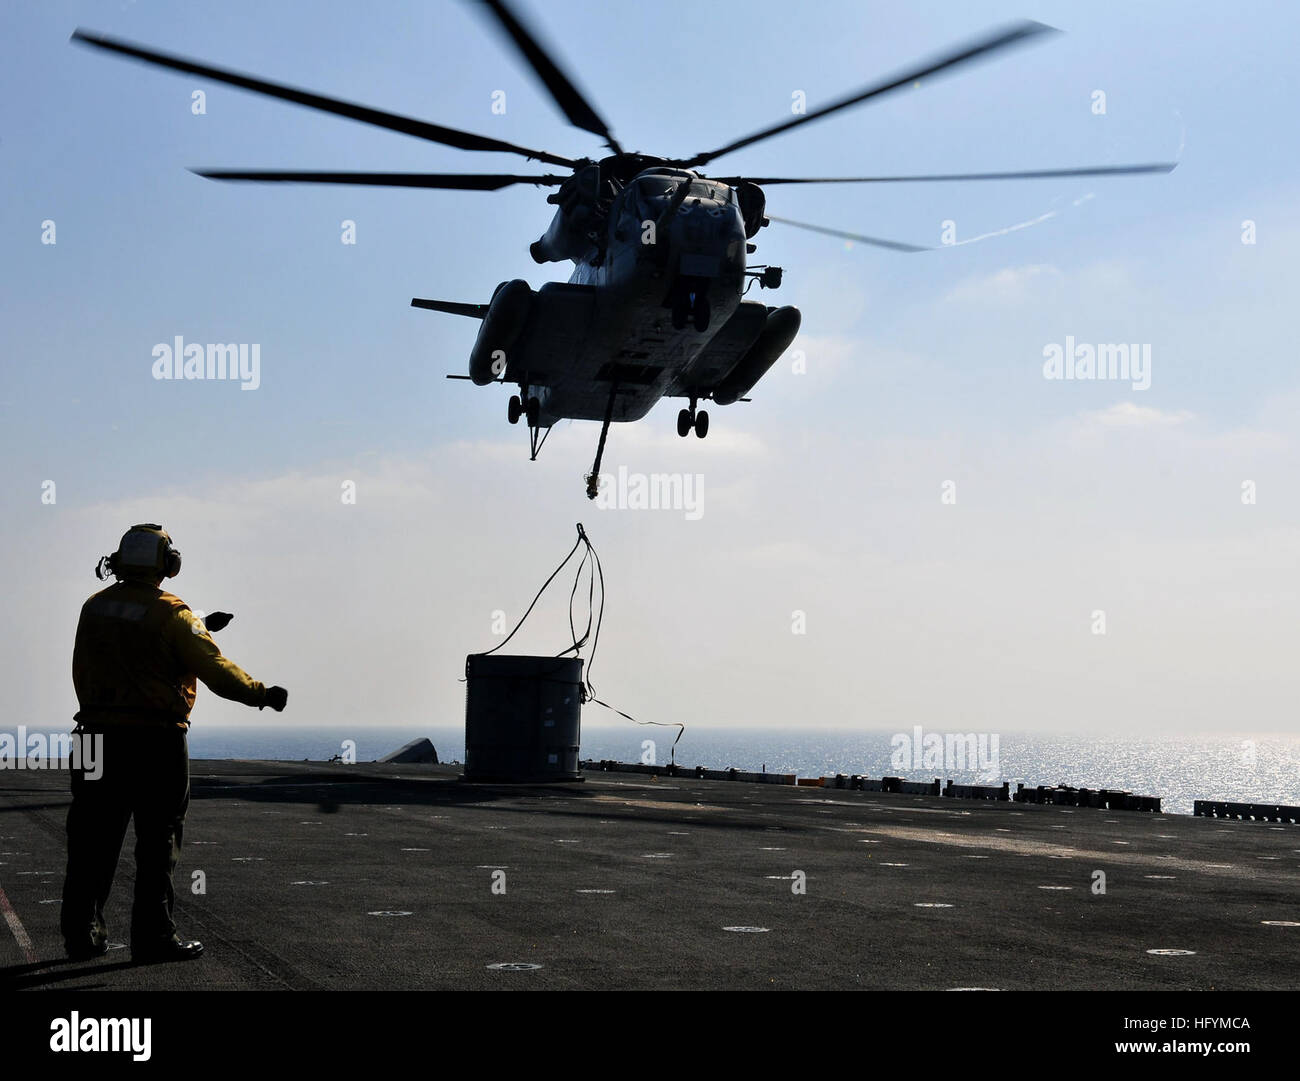 110423-N-ZS026-084 GULF OF ADEN (April 23, 2011) Aviation BoatswainÕs Mate 3rd Class Rodolfo Lopez signals a CH-53 Sea Stallion helicopter assigned to the Evil Eyes of Marine Medium Helicopter Squadron (HMM) 163 to detach cargo ropes after lowering an aircraft transmission container onto the flight deck of the amphibious assault ship USS Boxer (LHD 4). Boxer is underway supporting maritime security operations and theater security cooperation efforts in the U.S. 5th Fleet area of responsibility. (U.S. Navy photo by Mass Communication Specialist 3rd Class Trevor Welsh/Released) US Navy 110423-N- Stock Photo